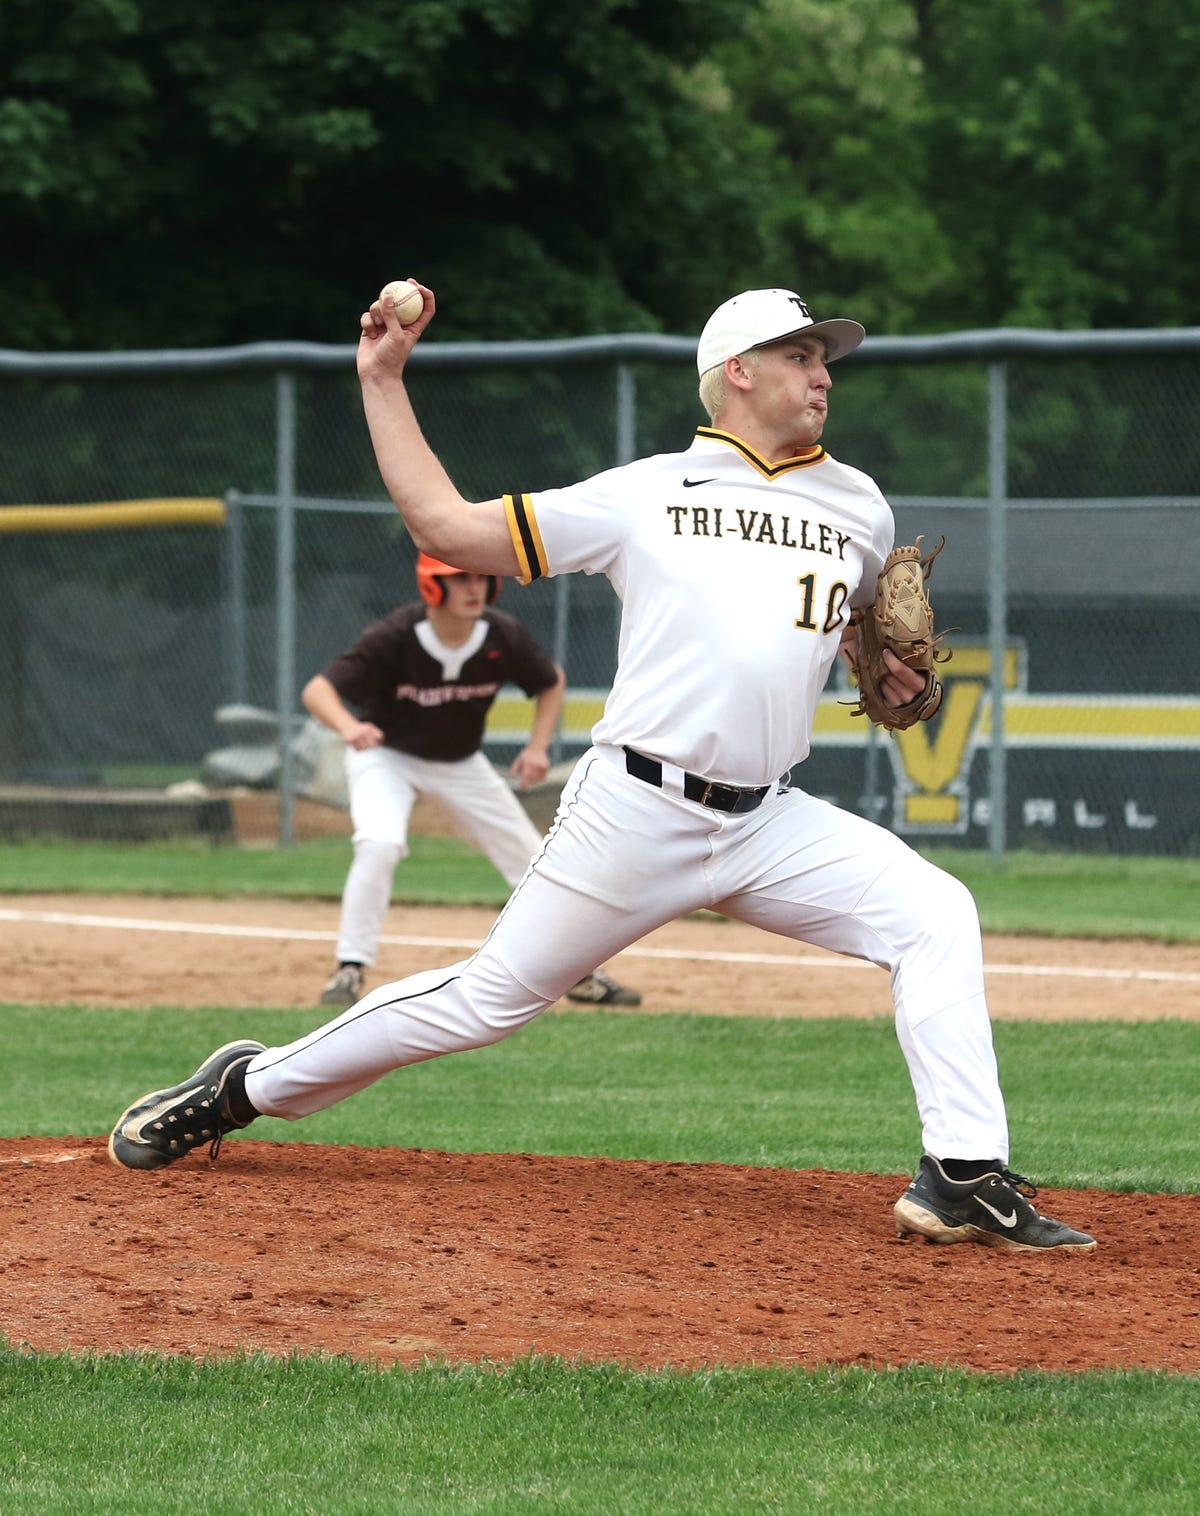 Tri-Valley’s Pitching Dominates in 9-0 Victory Over Meadowbrook, Sets Up Showdown with Indian Valley